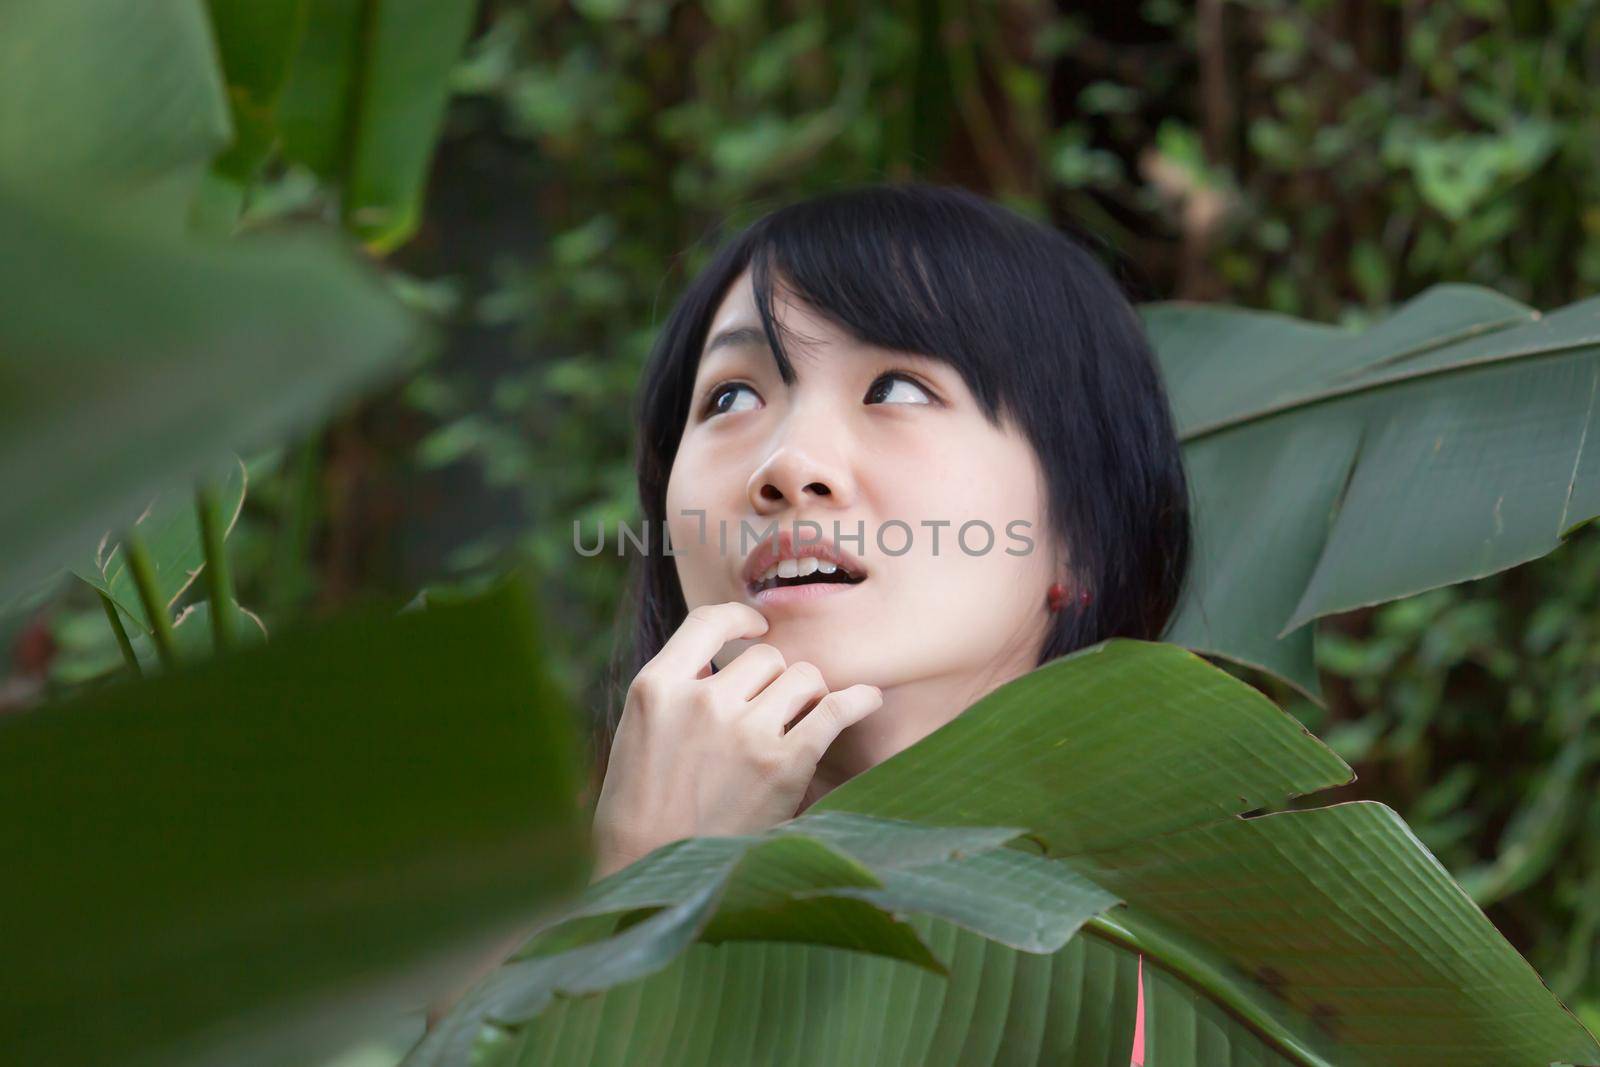 Beautiful Asian girl by green foliage with hand on chin, portrait